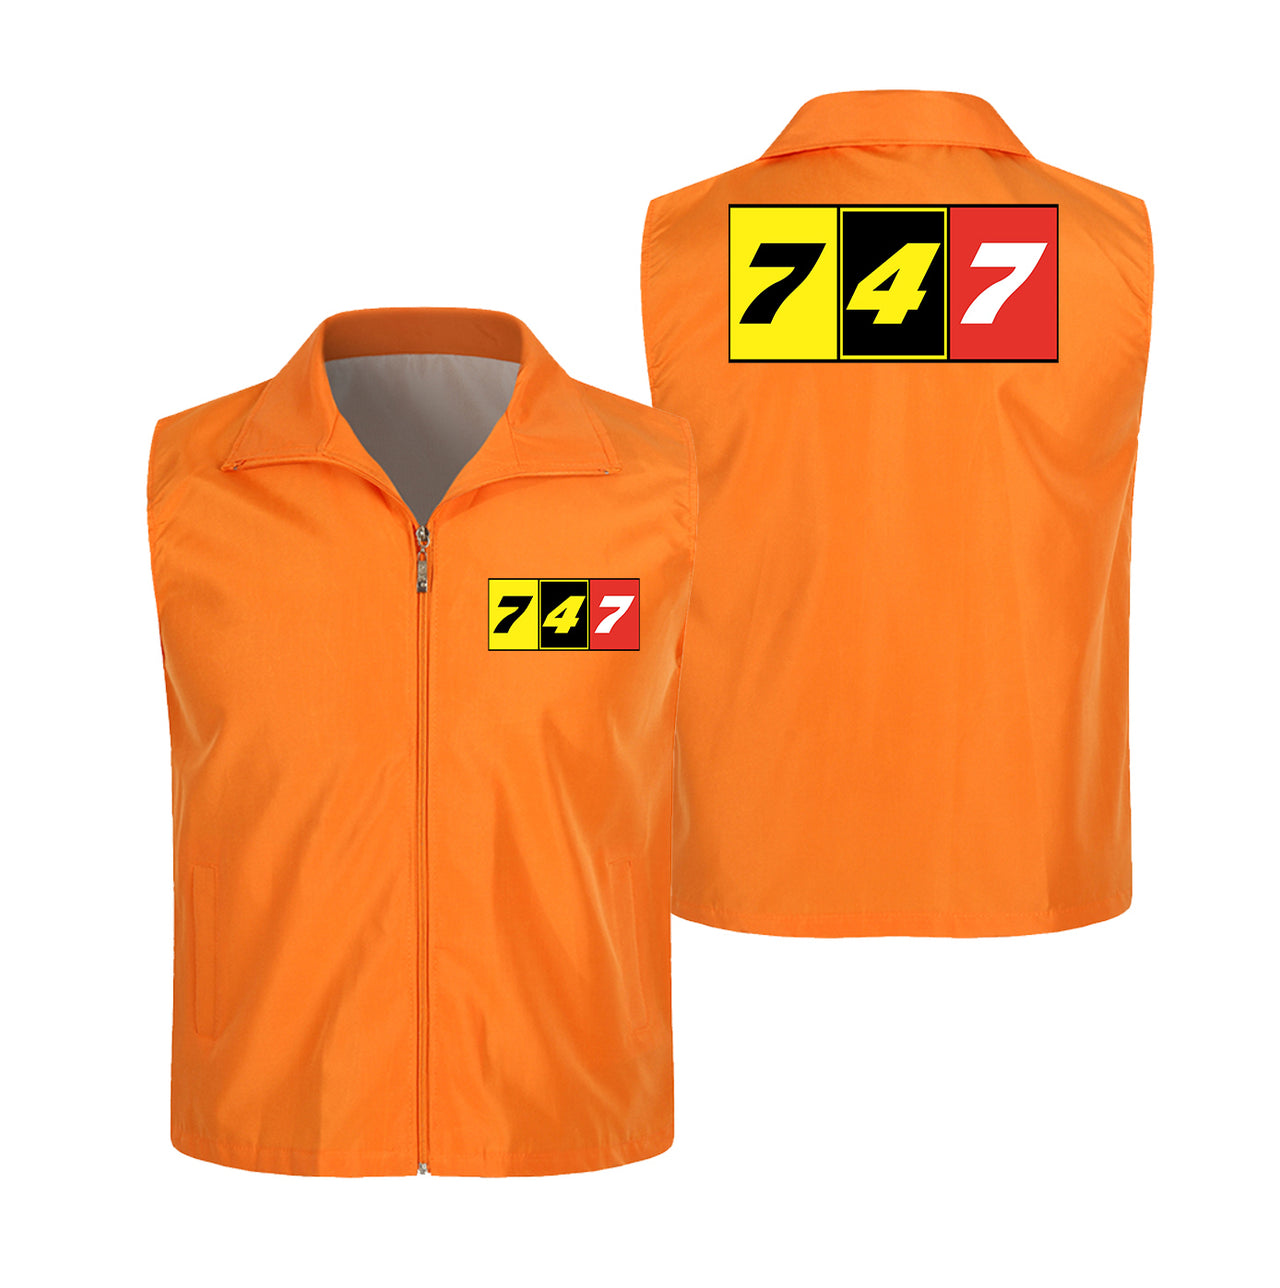 Flat Colourful 747 Designed Thin Style Vests